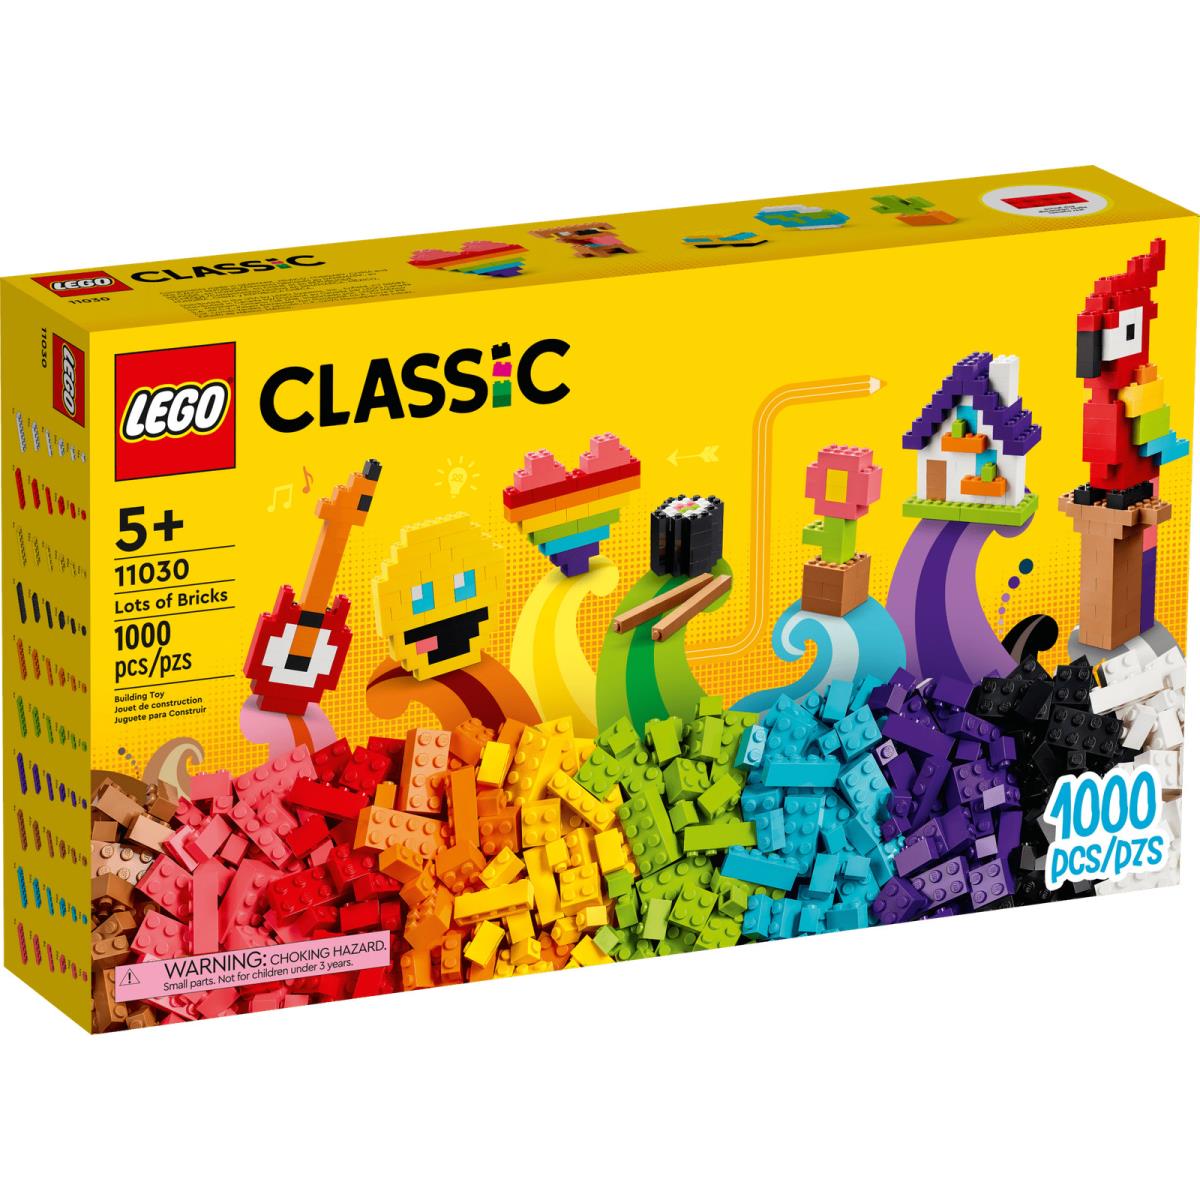 Lego Classic Lots of Bricks Construction Toy 11030 Building Set Gift